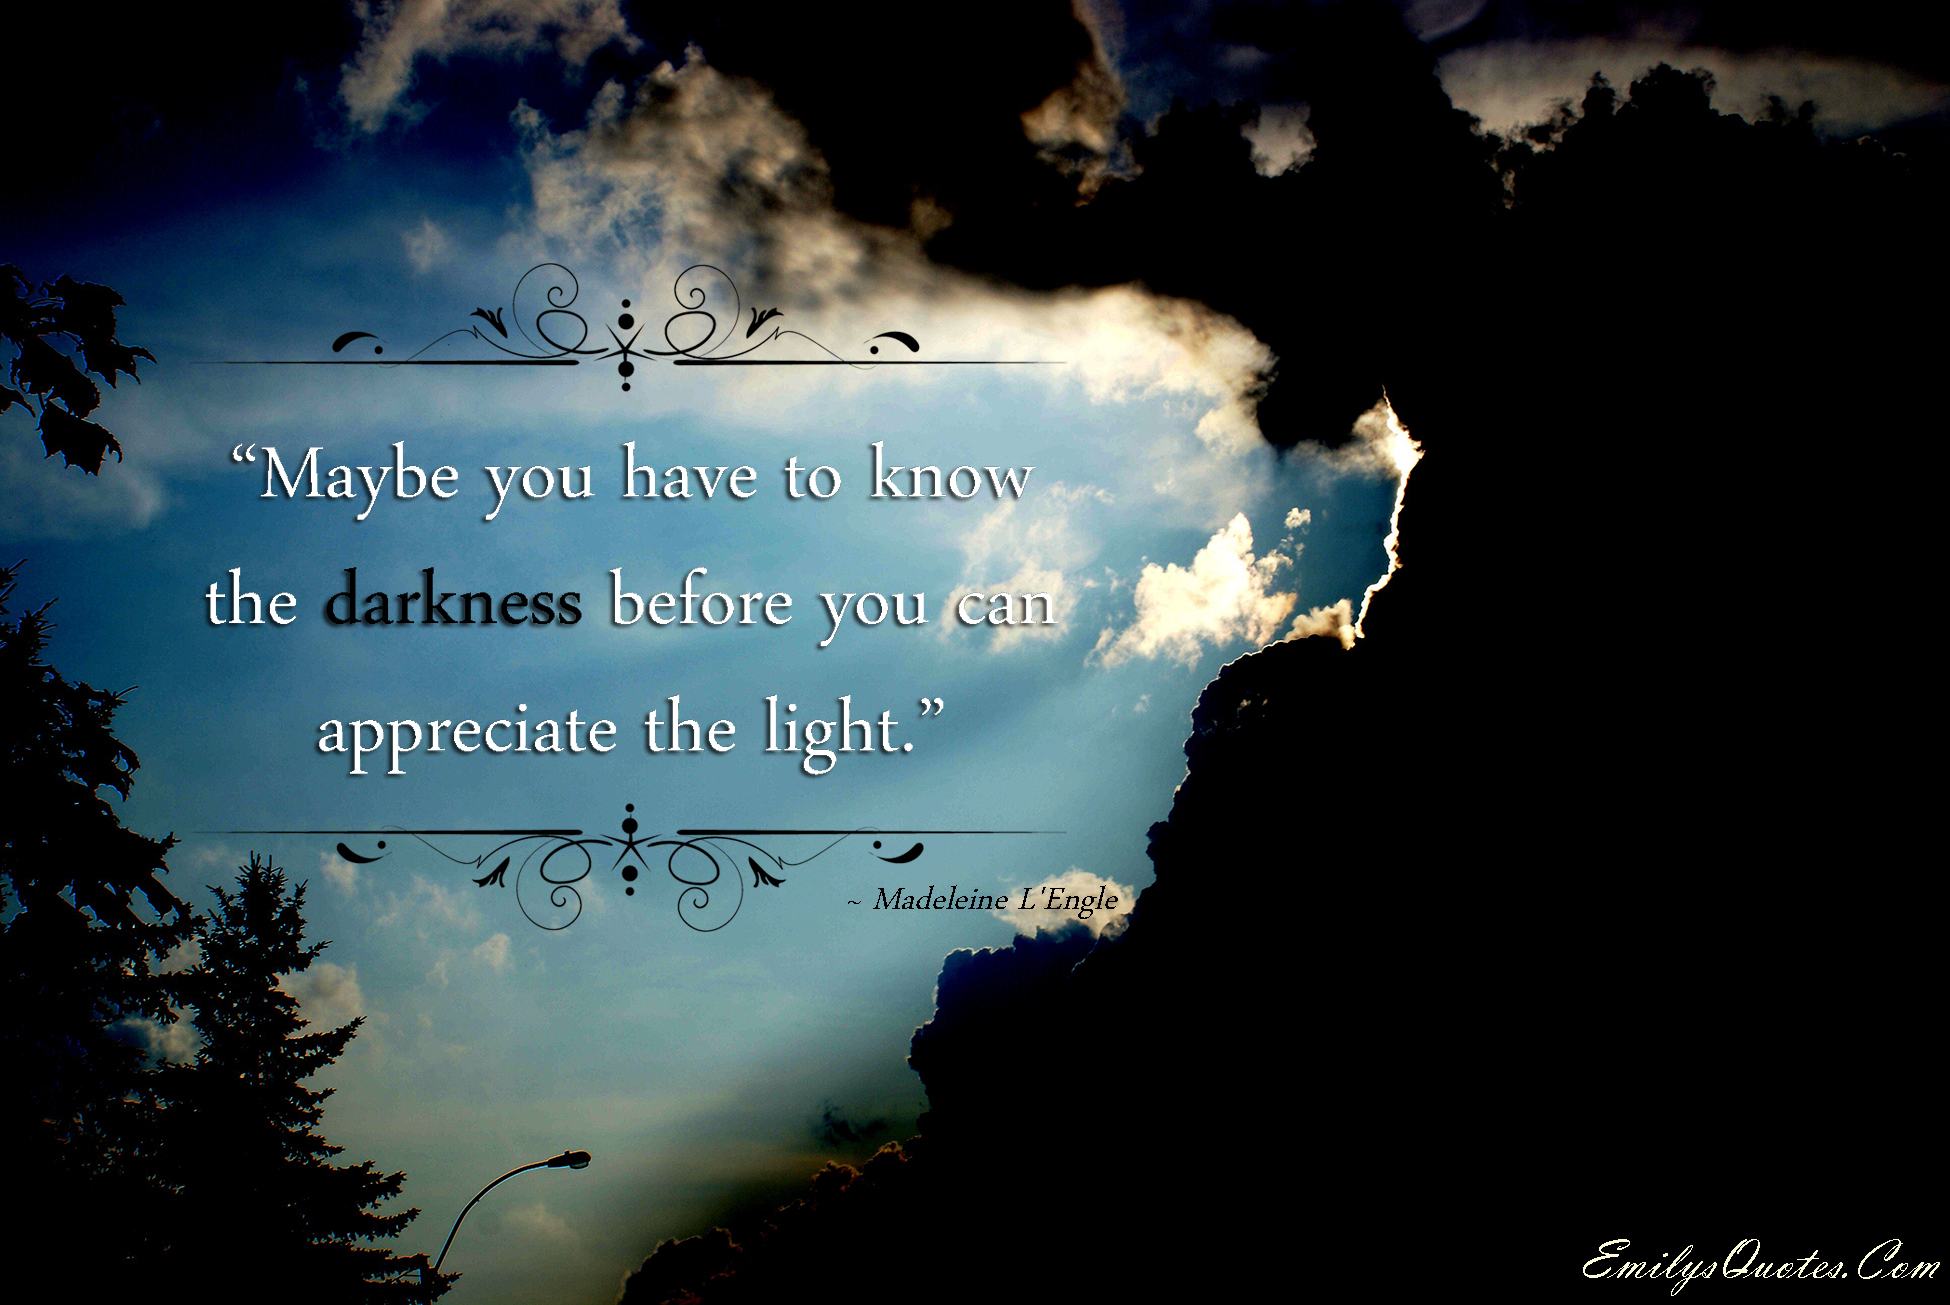 Maybe you have to know the darkness before you can appreciate the light